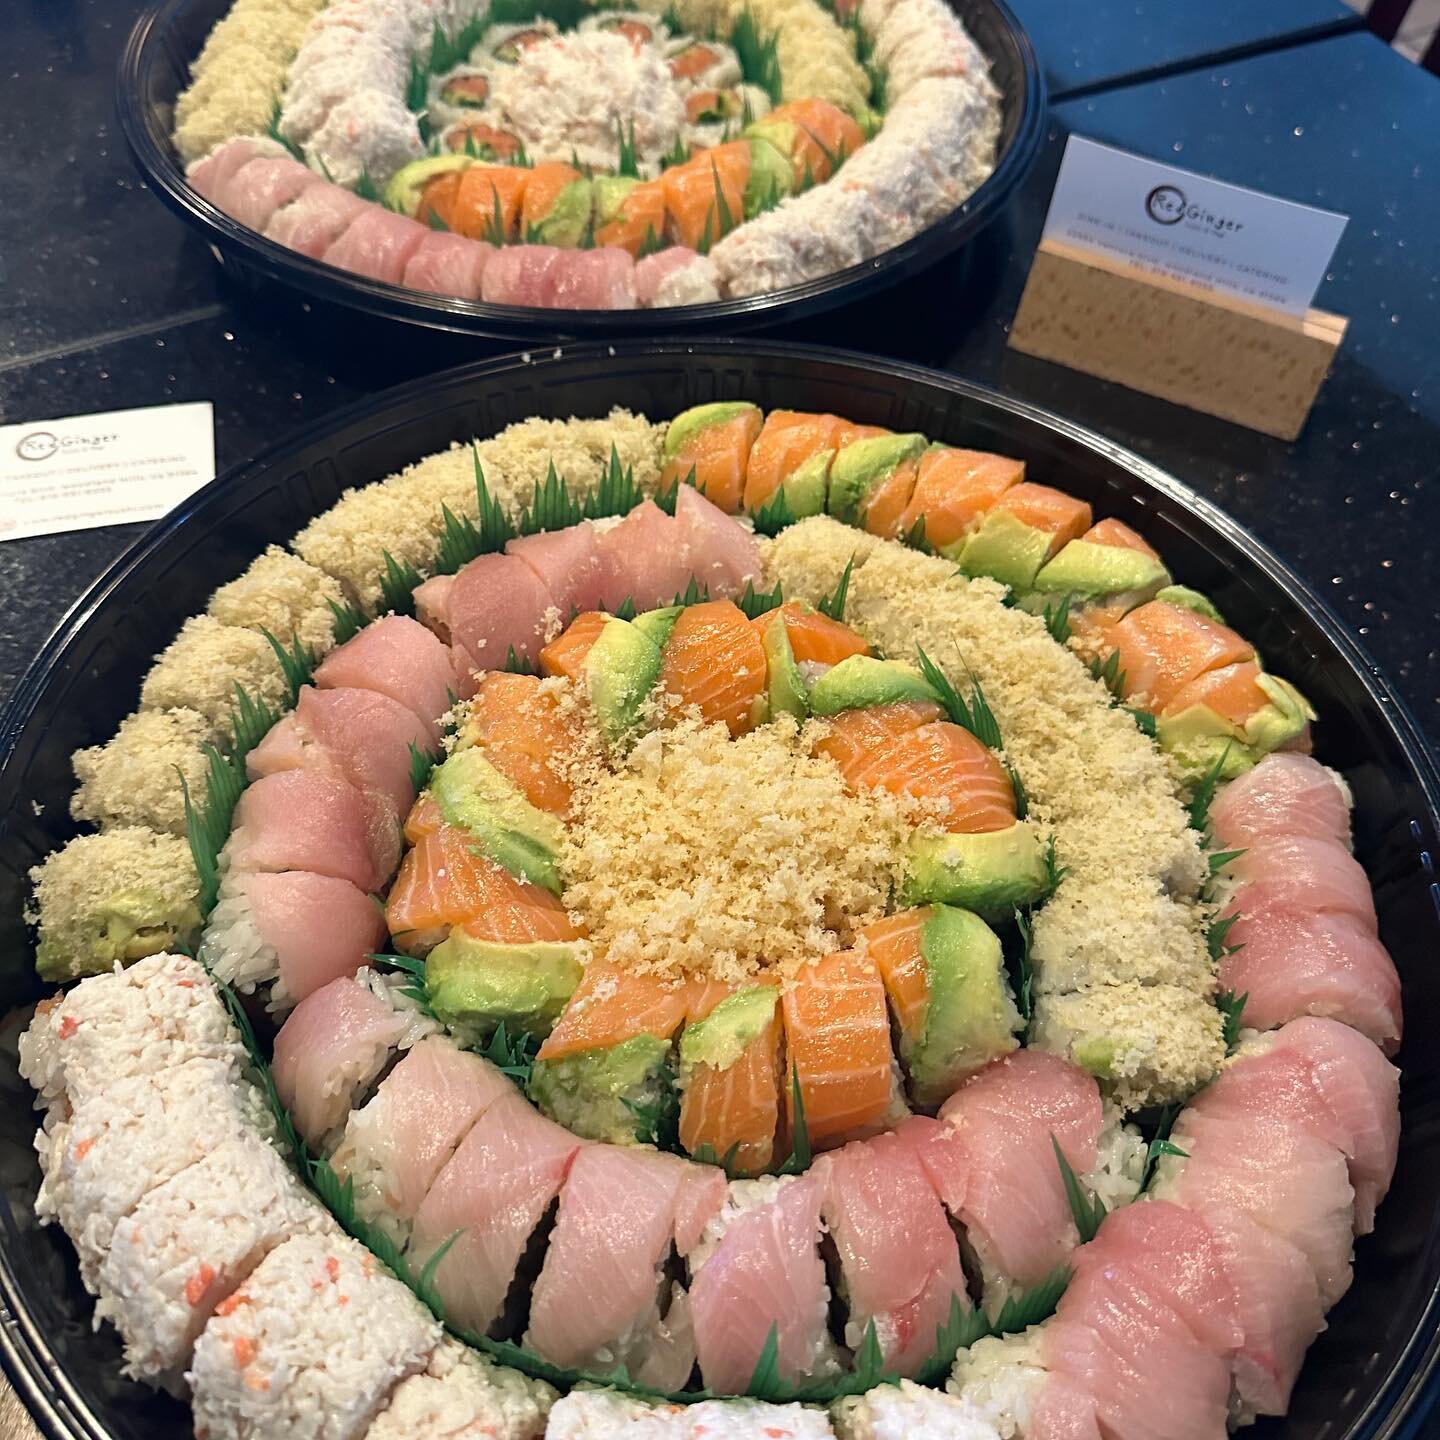 Adding more colors to your events. Deliciousness delivered 🚘🍣 Give us a call for any catering event 818-591-8055 or send us a DM!
&bull;
&bull;
&bull;
#sushi #delicious #deliciousfood #sushilovers #sashimi #sashimilover #sushibar #freshsushi
#thaic